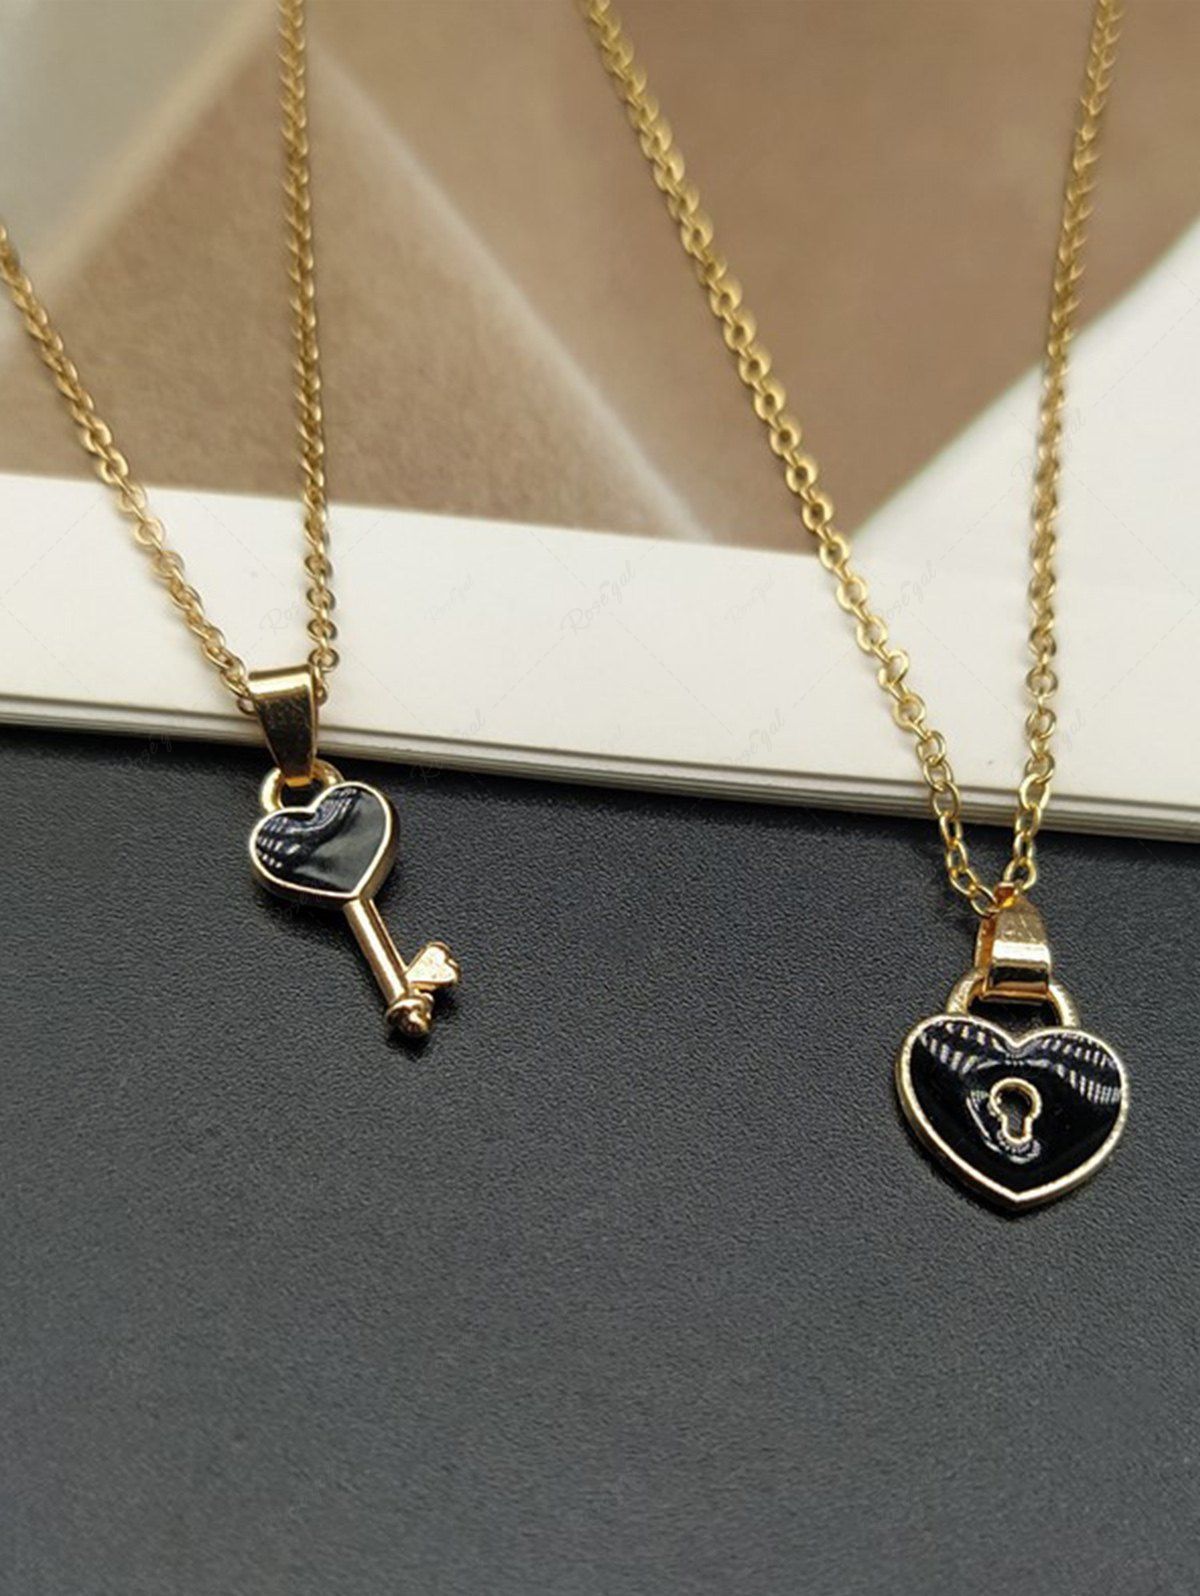 New Valentines Lover's Heart Lock Key Pendant Couple Necklace  